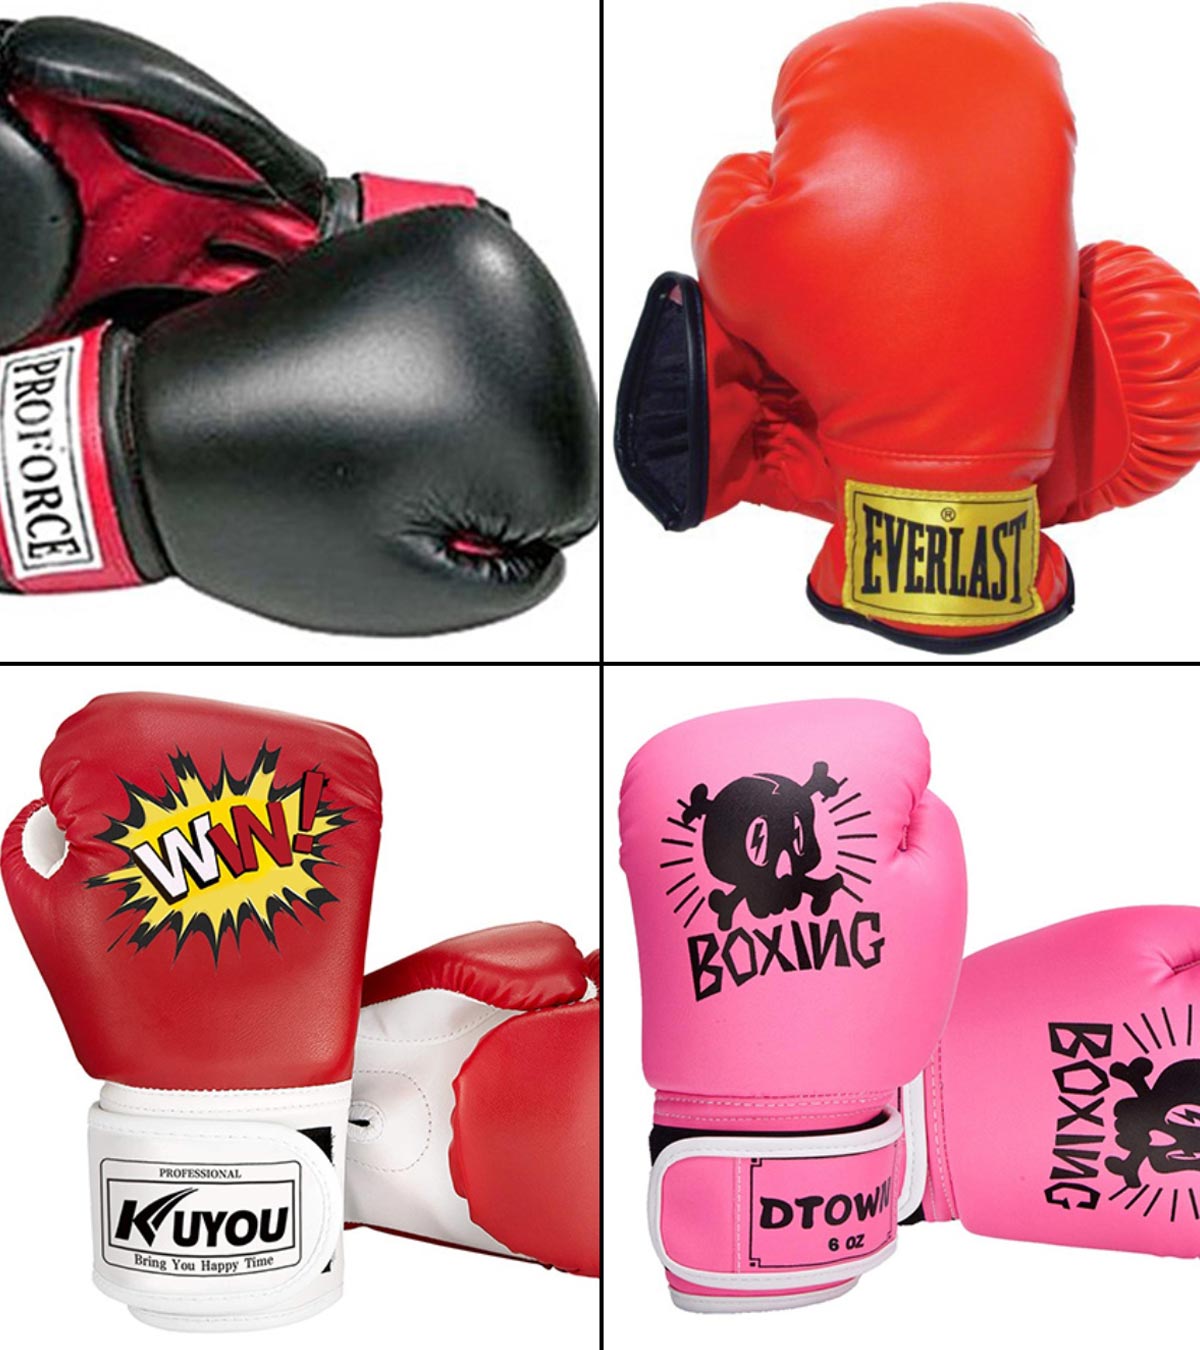 Farabi Kids Boxing Gloves Red 6oz Junior Boxing Gloves Punching Mitt Kids Training Boxing Gloves for The Kids Age ranging Between 3 to 12 Yeas. 